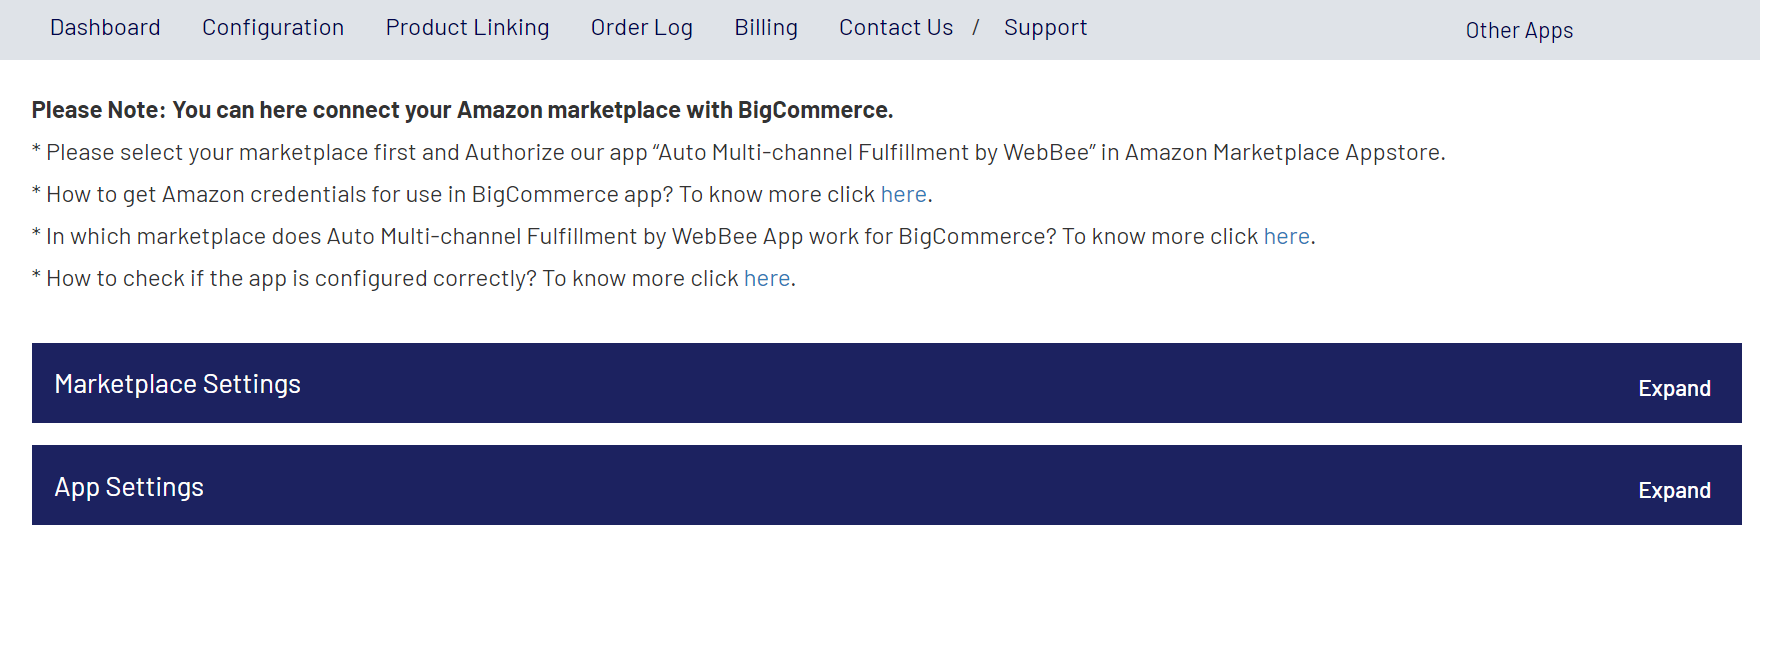 Dashboard For Amazon marketplace with BigCommerce